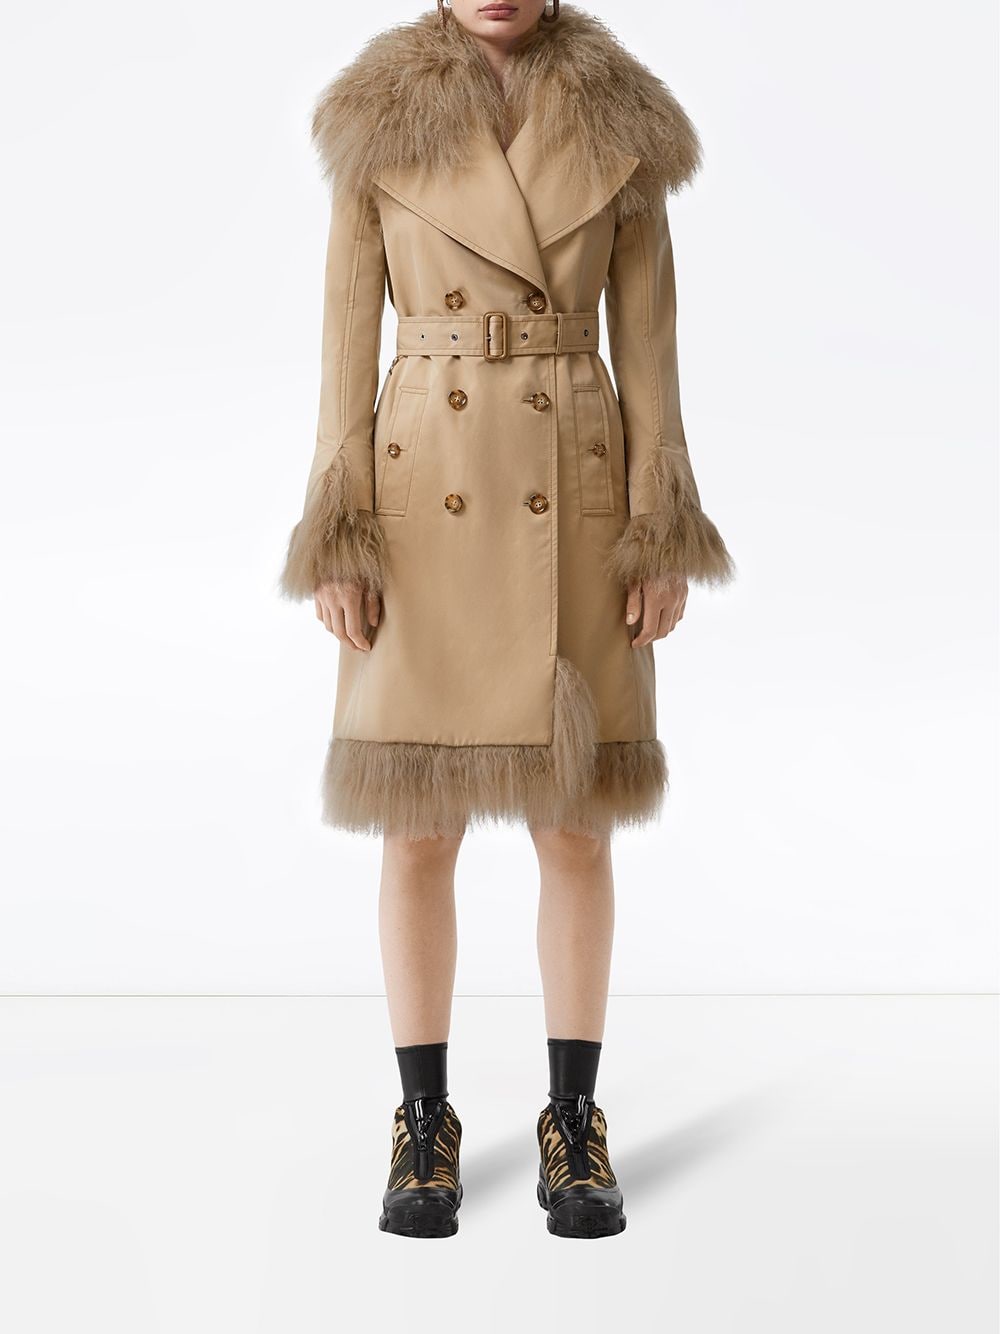 Burberry shearling-trimmed trench coat 4562479 - Farfetch